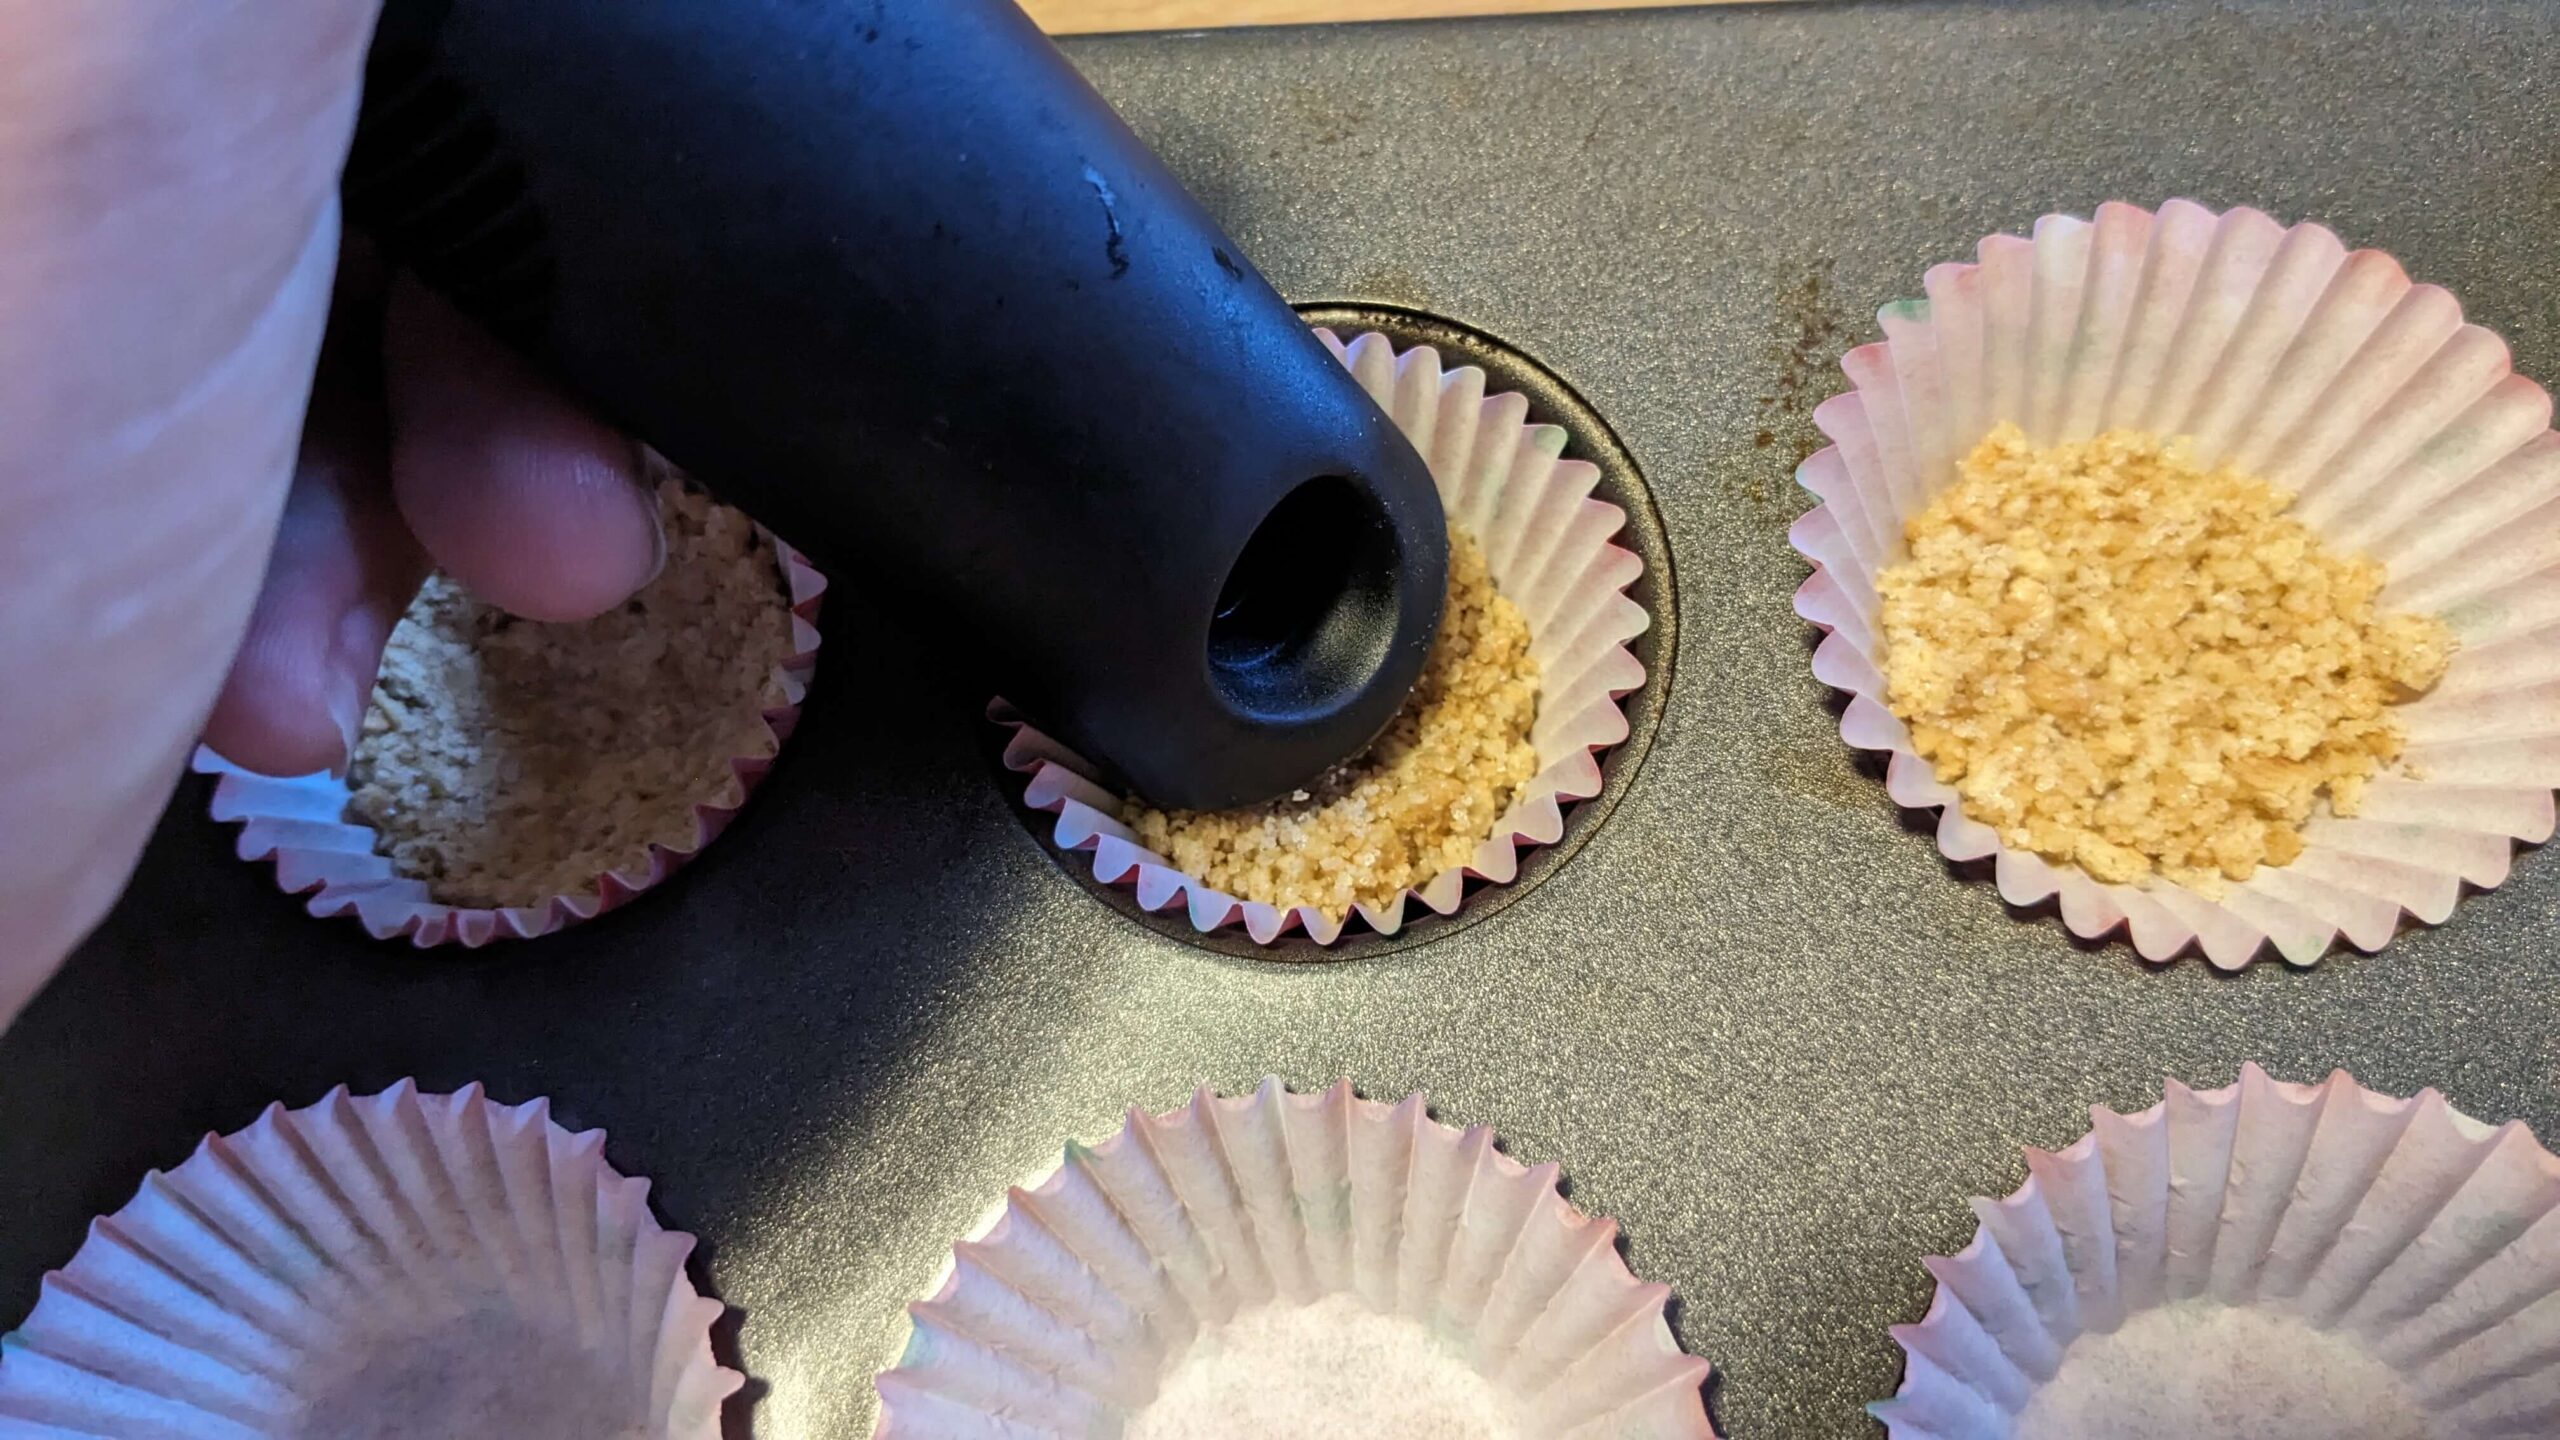 graham cracker crust being pressed into a mini muffin tin